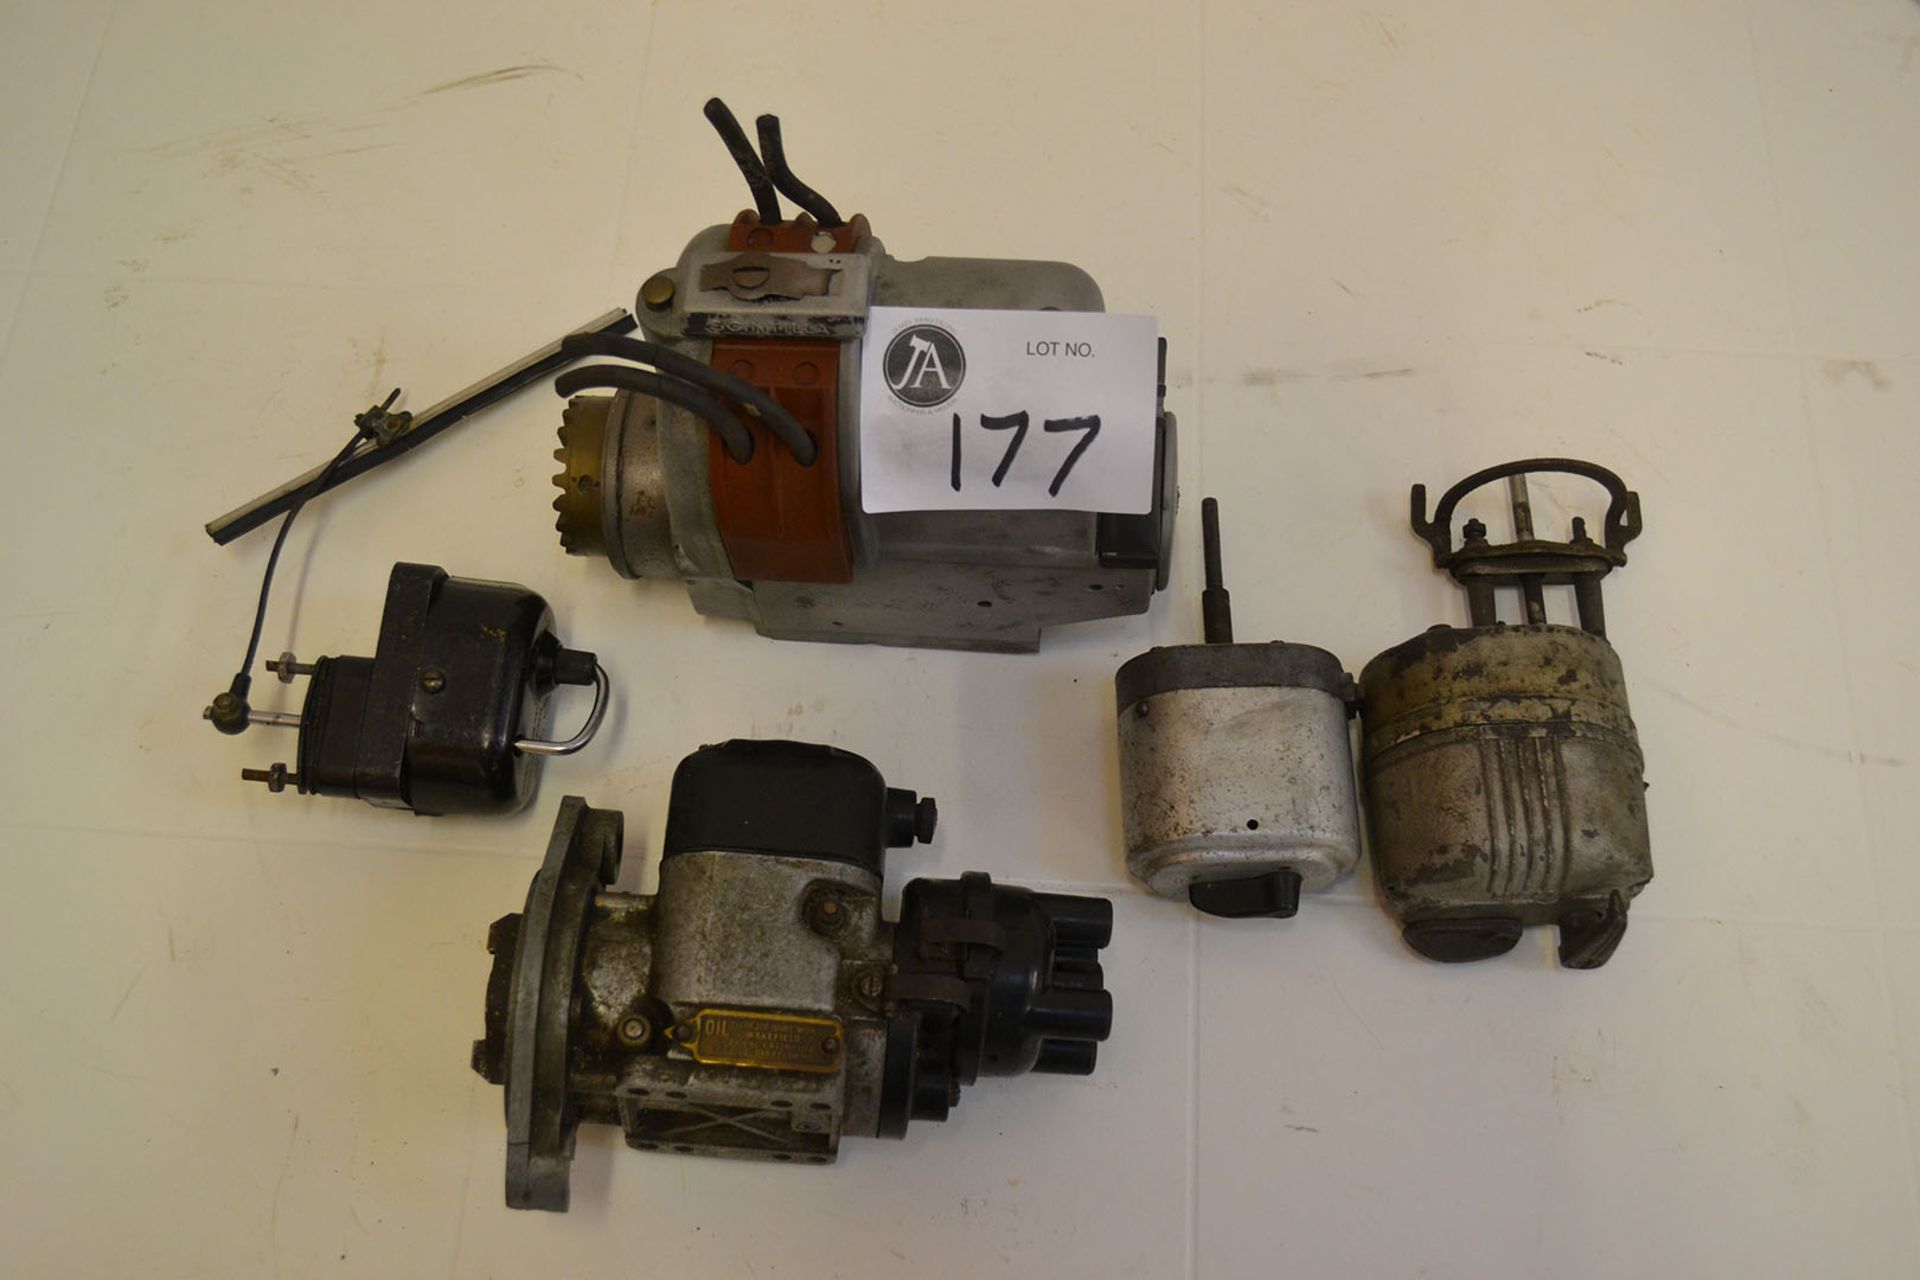 Assorted automotive electrical components